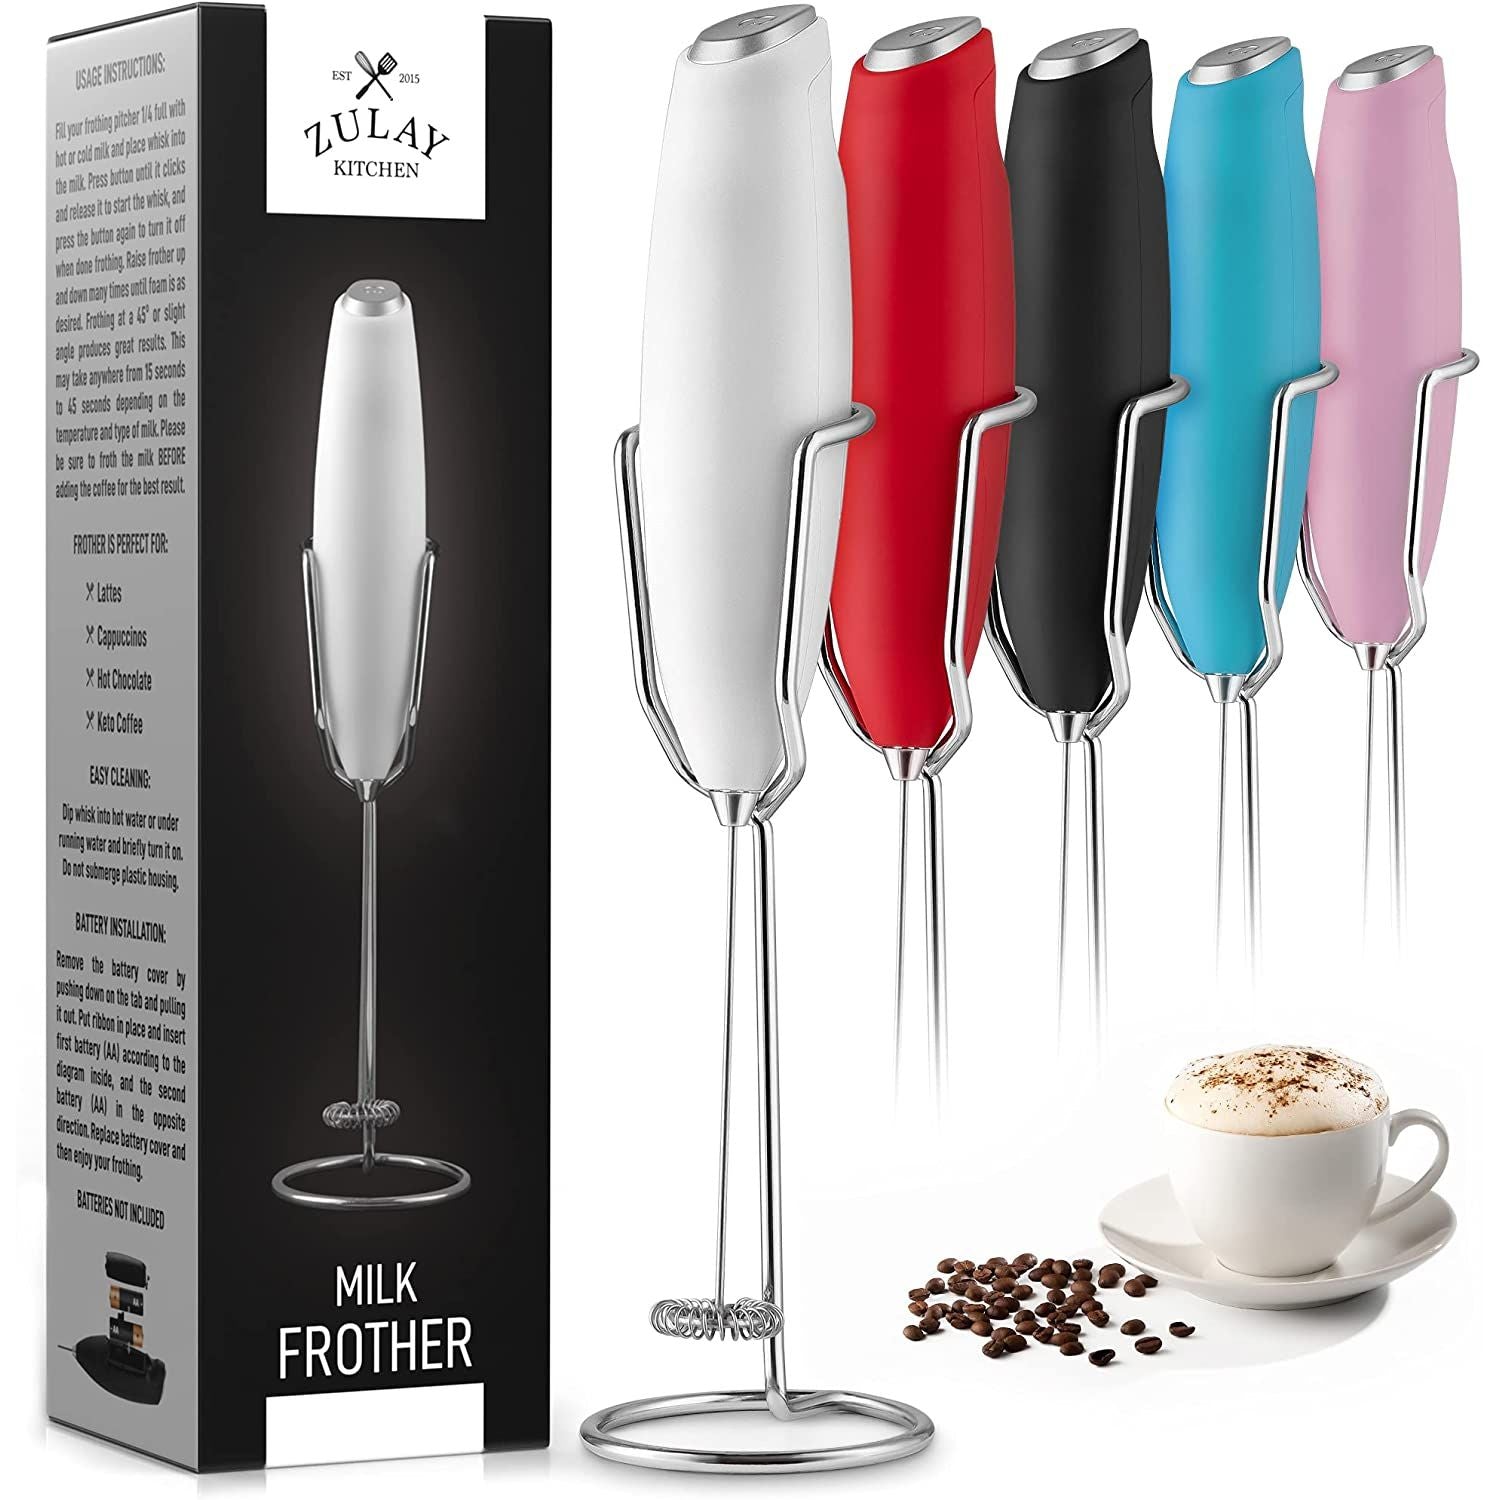 Battery-powered Black Milk Frother With Stand For Coffee, Milk And More